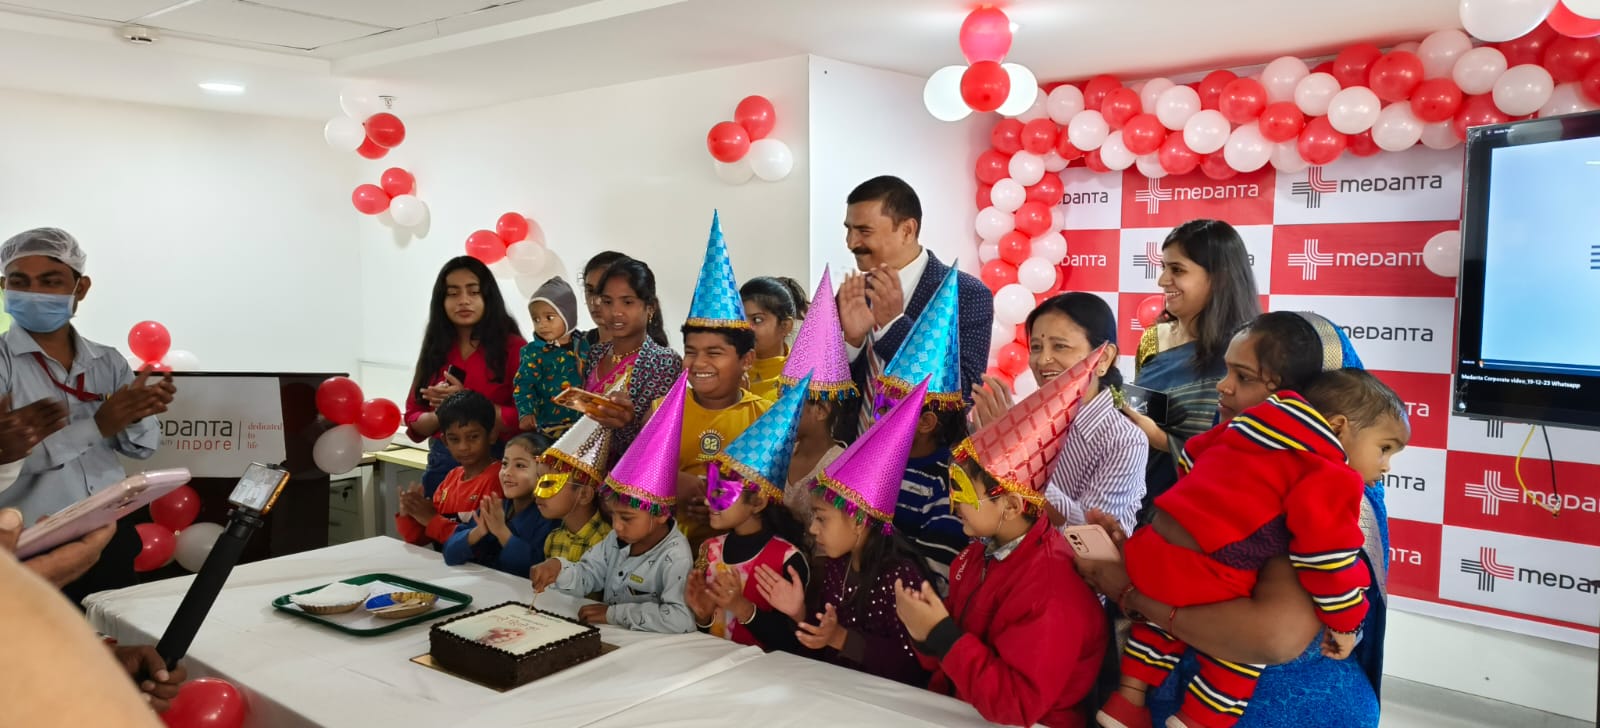 Medanta Hospital Indore Gifts Healthy Lives to Children Afflicted with Congenital Heart Disease